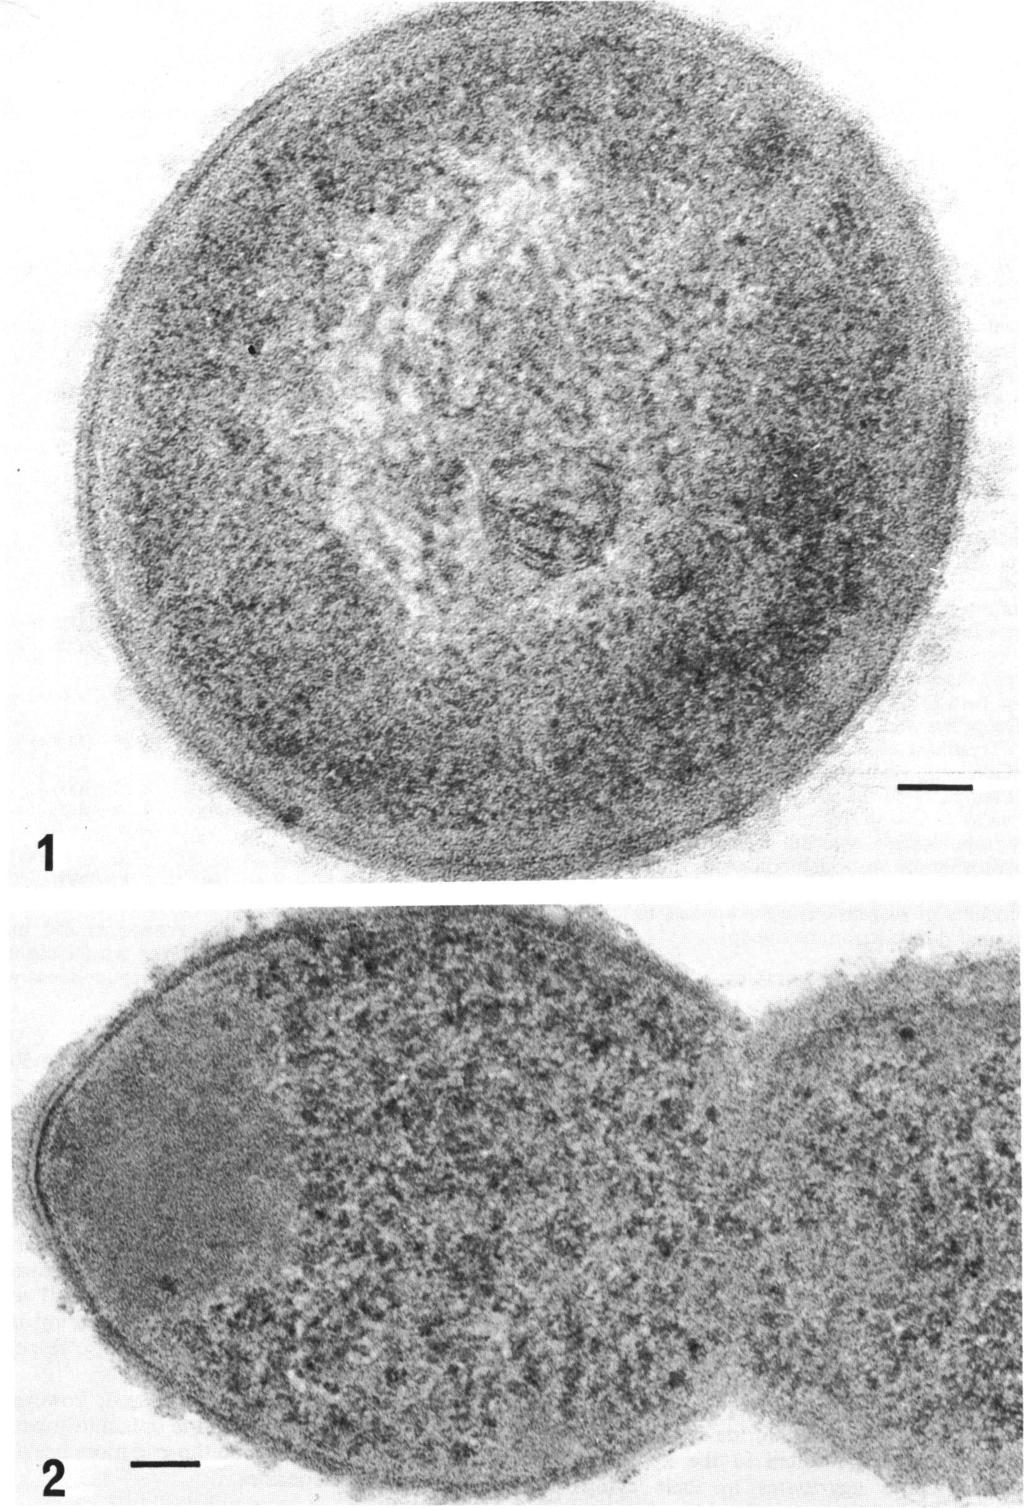 FIG. 2. Optochin-resistant 70 pneumococcus incubated at 37 C for 30 min with 500 lag of optochin hydrochloride per ml.